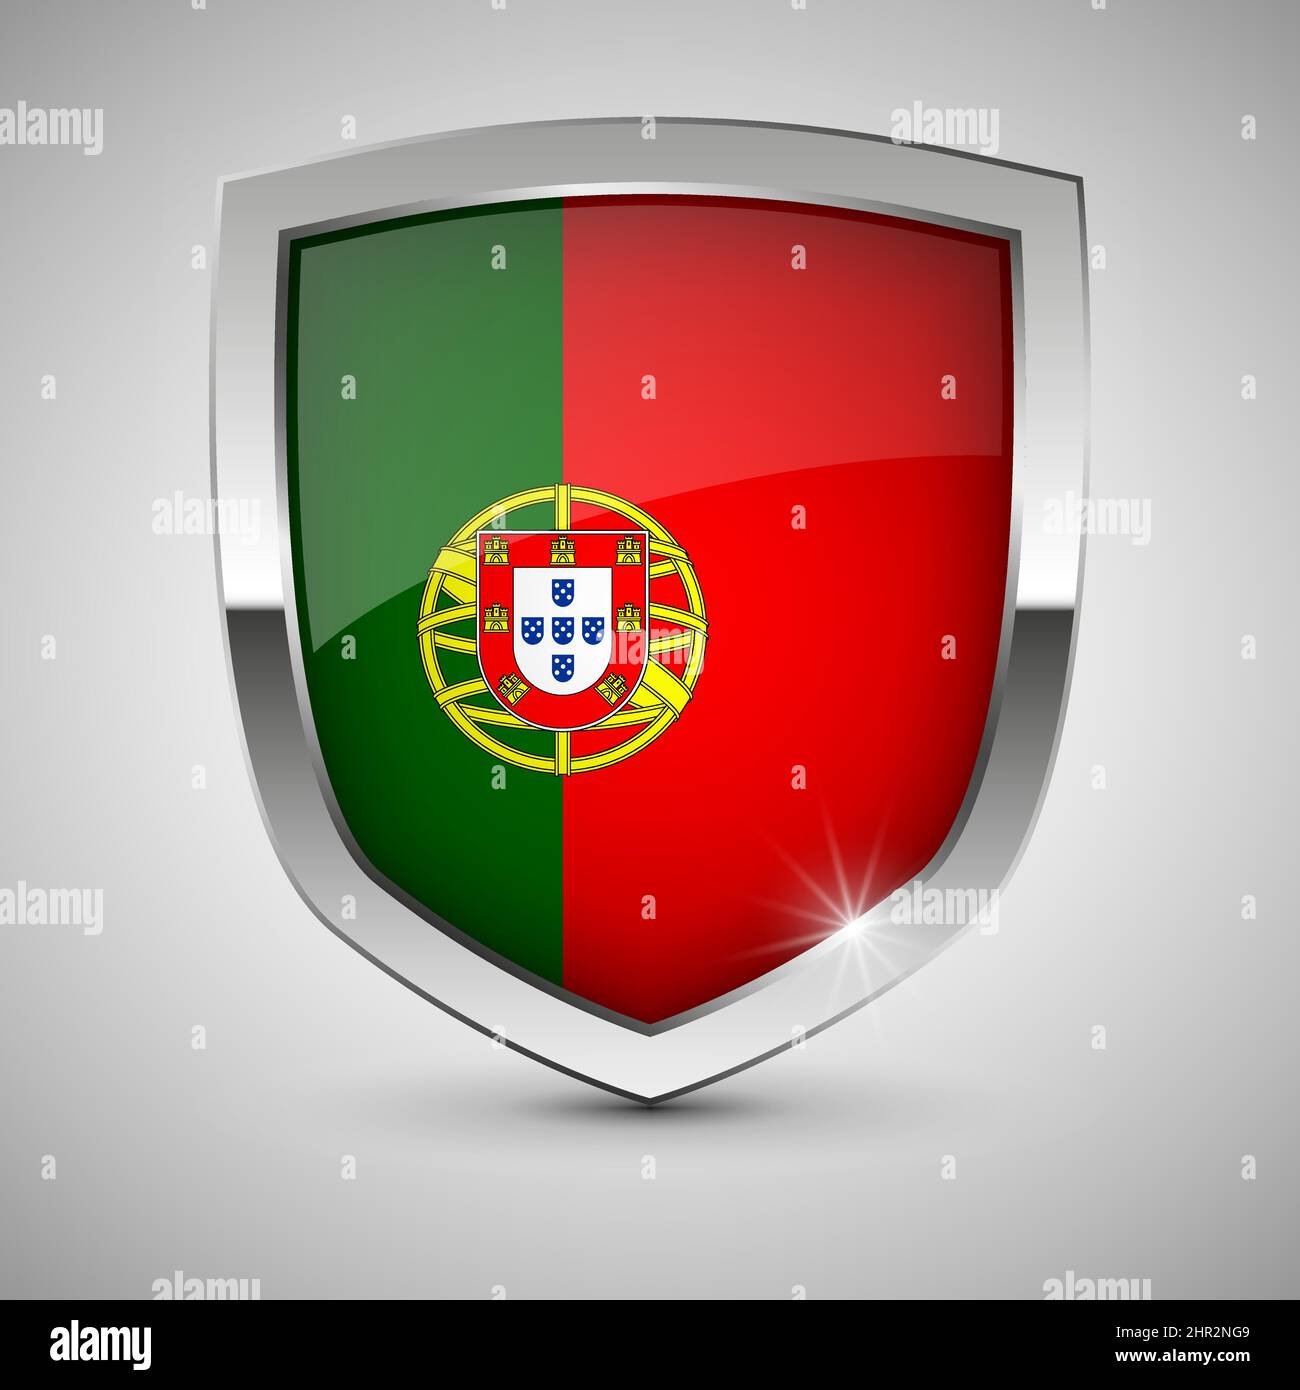 EPS10 Vector Patriotic shield with flag of Portugal. An element of impact for the use you want to make of it. Stock Vector